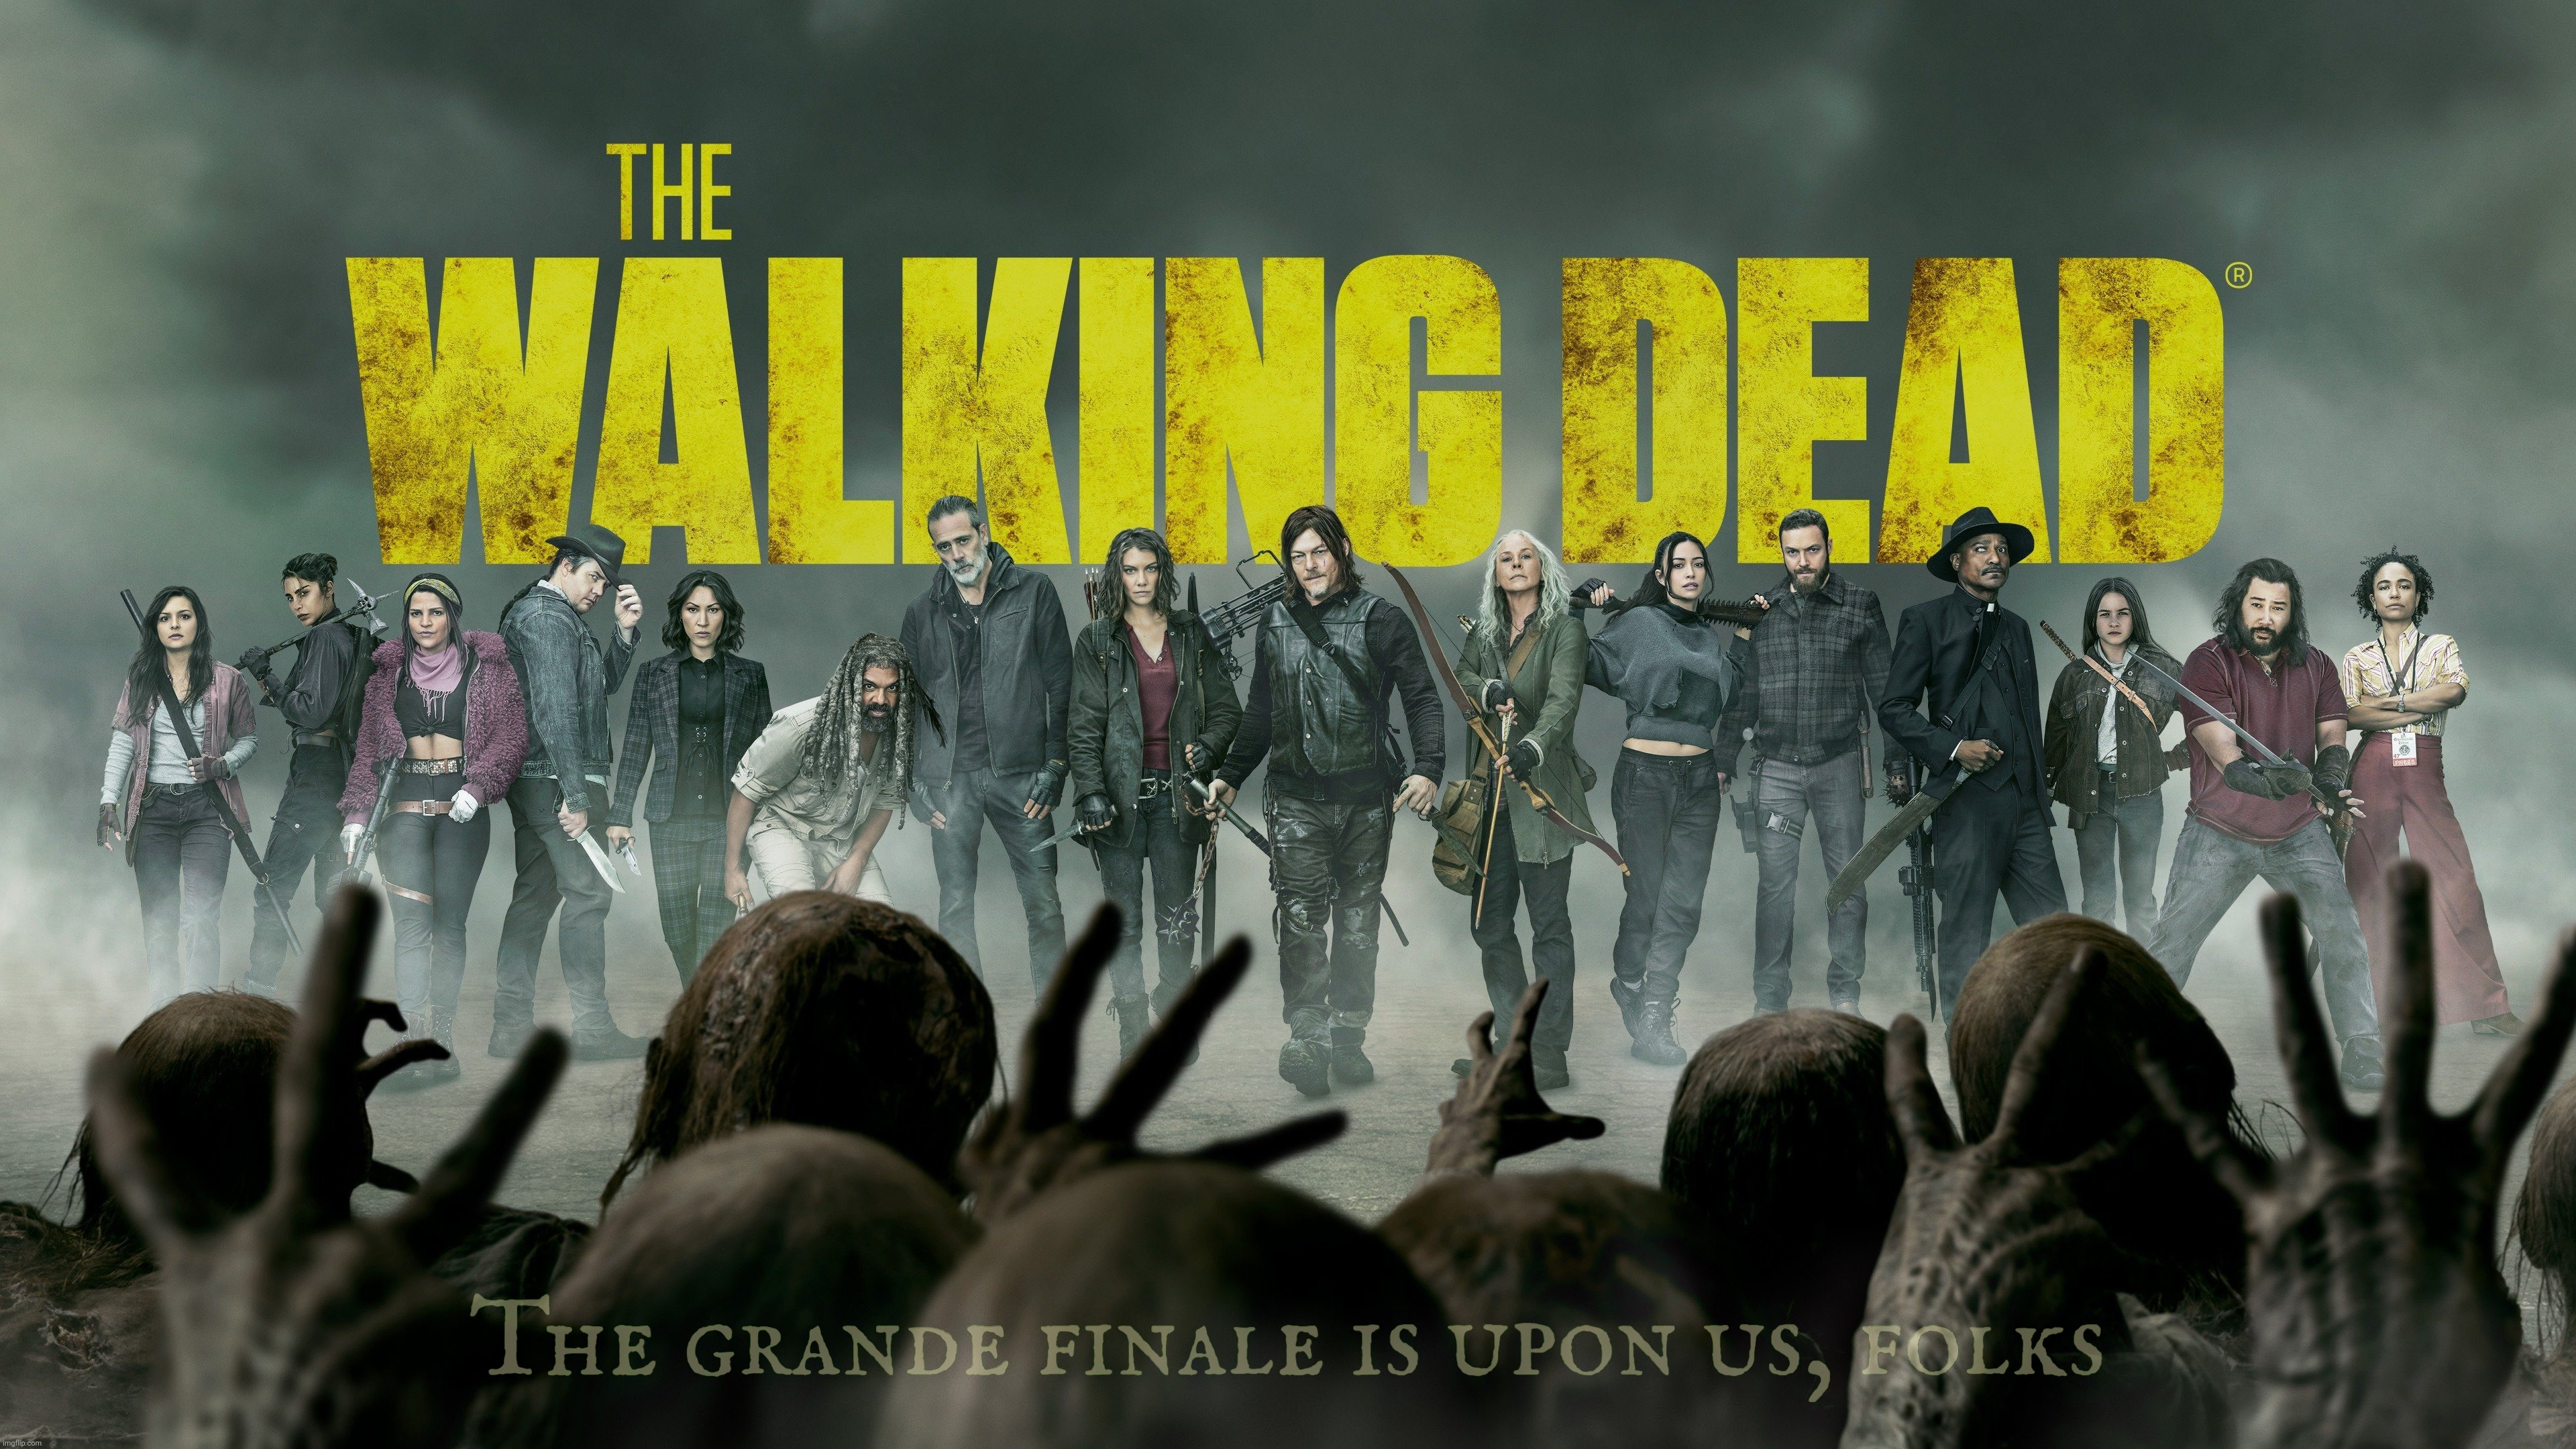 Sad day, but at least it ran to the end. Thank you all... | The grande finale is upon us, folks | image tagged in the walking dead,twd,the final episode,thanks for the memories,we love yous all,11 seasons 177 episodes 12 years | made w/ Imgflip meme maker